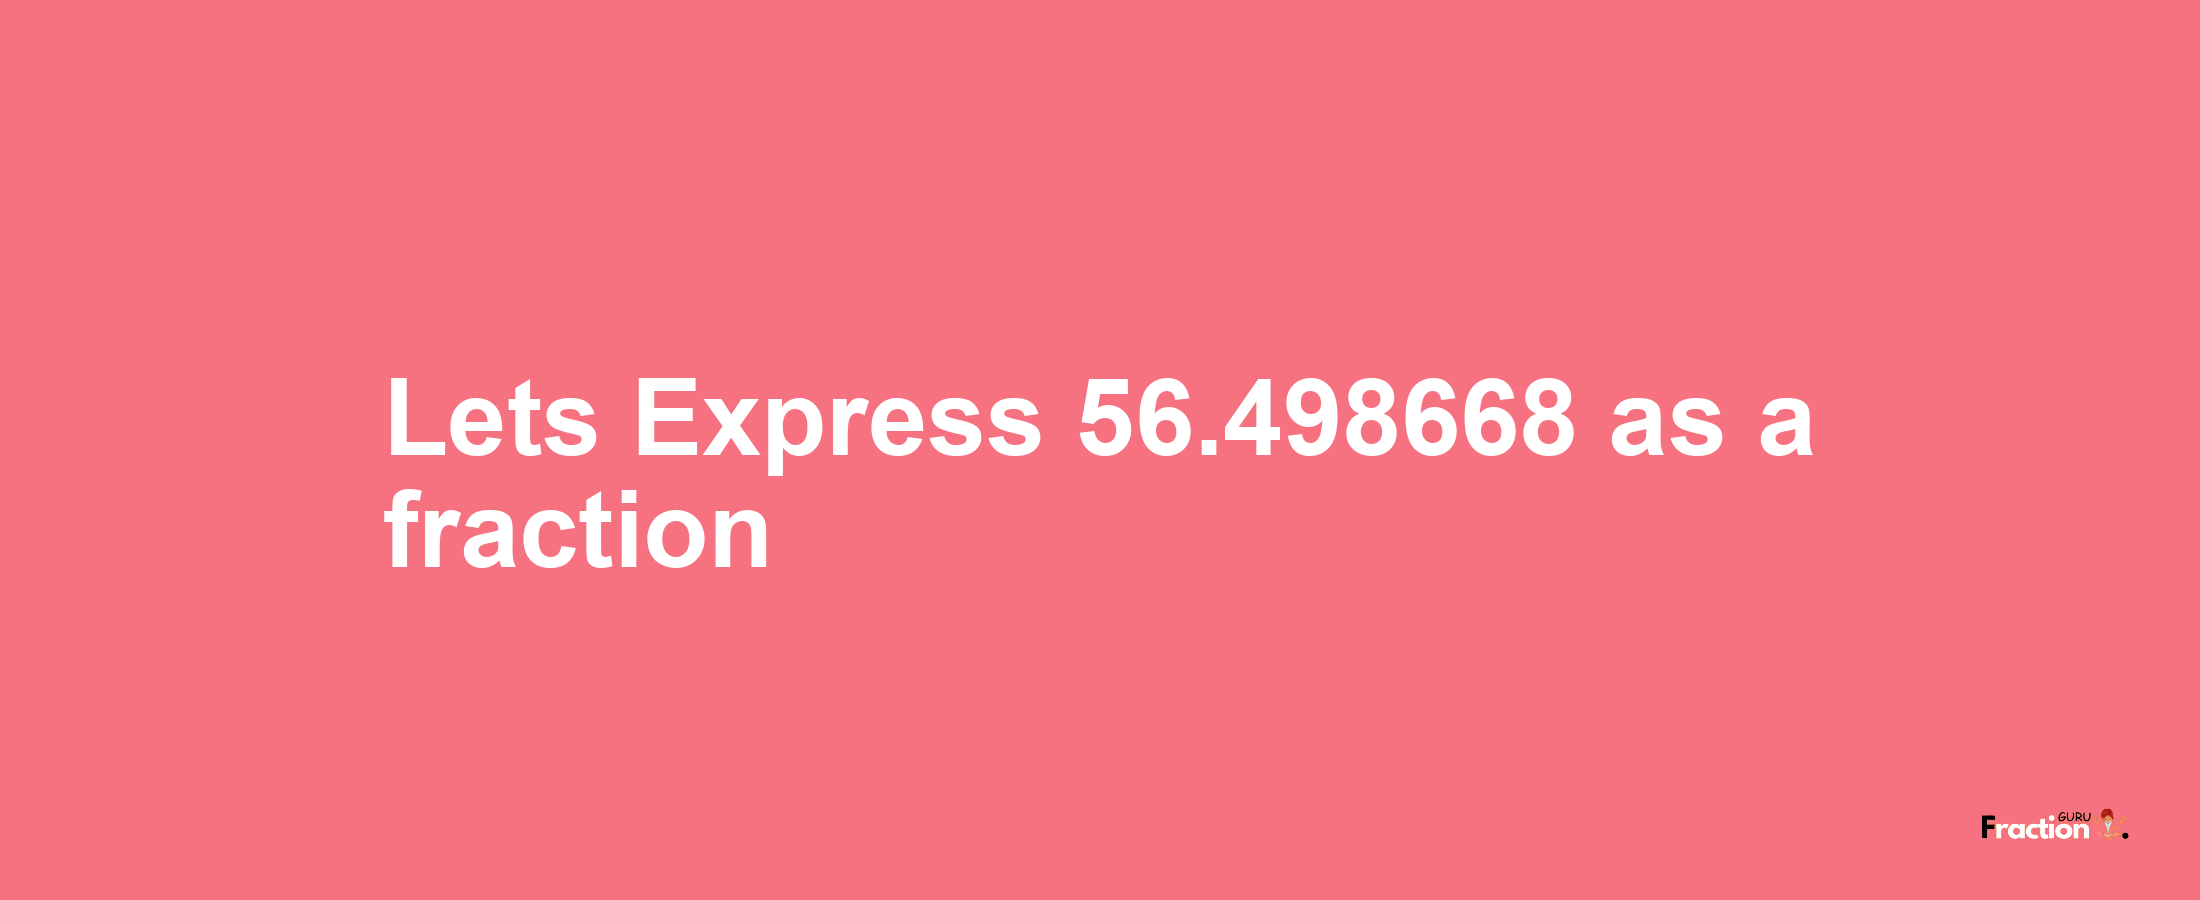 Lets Express 56.498668 as afraction